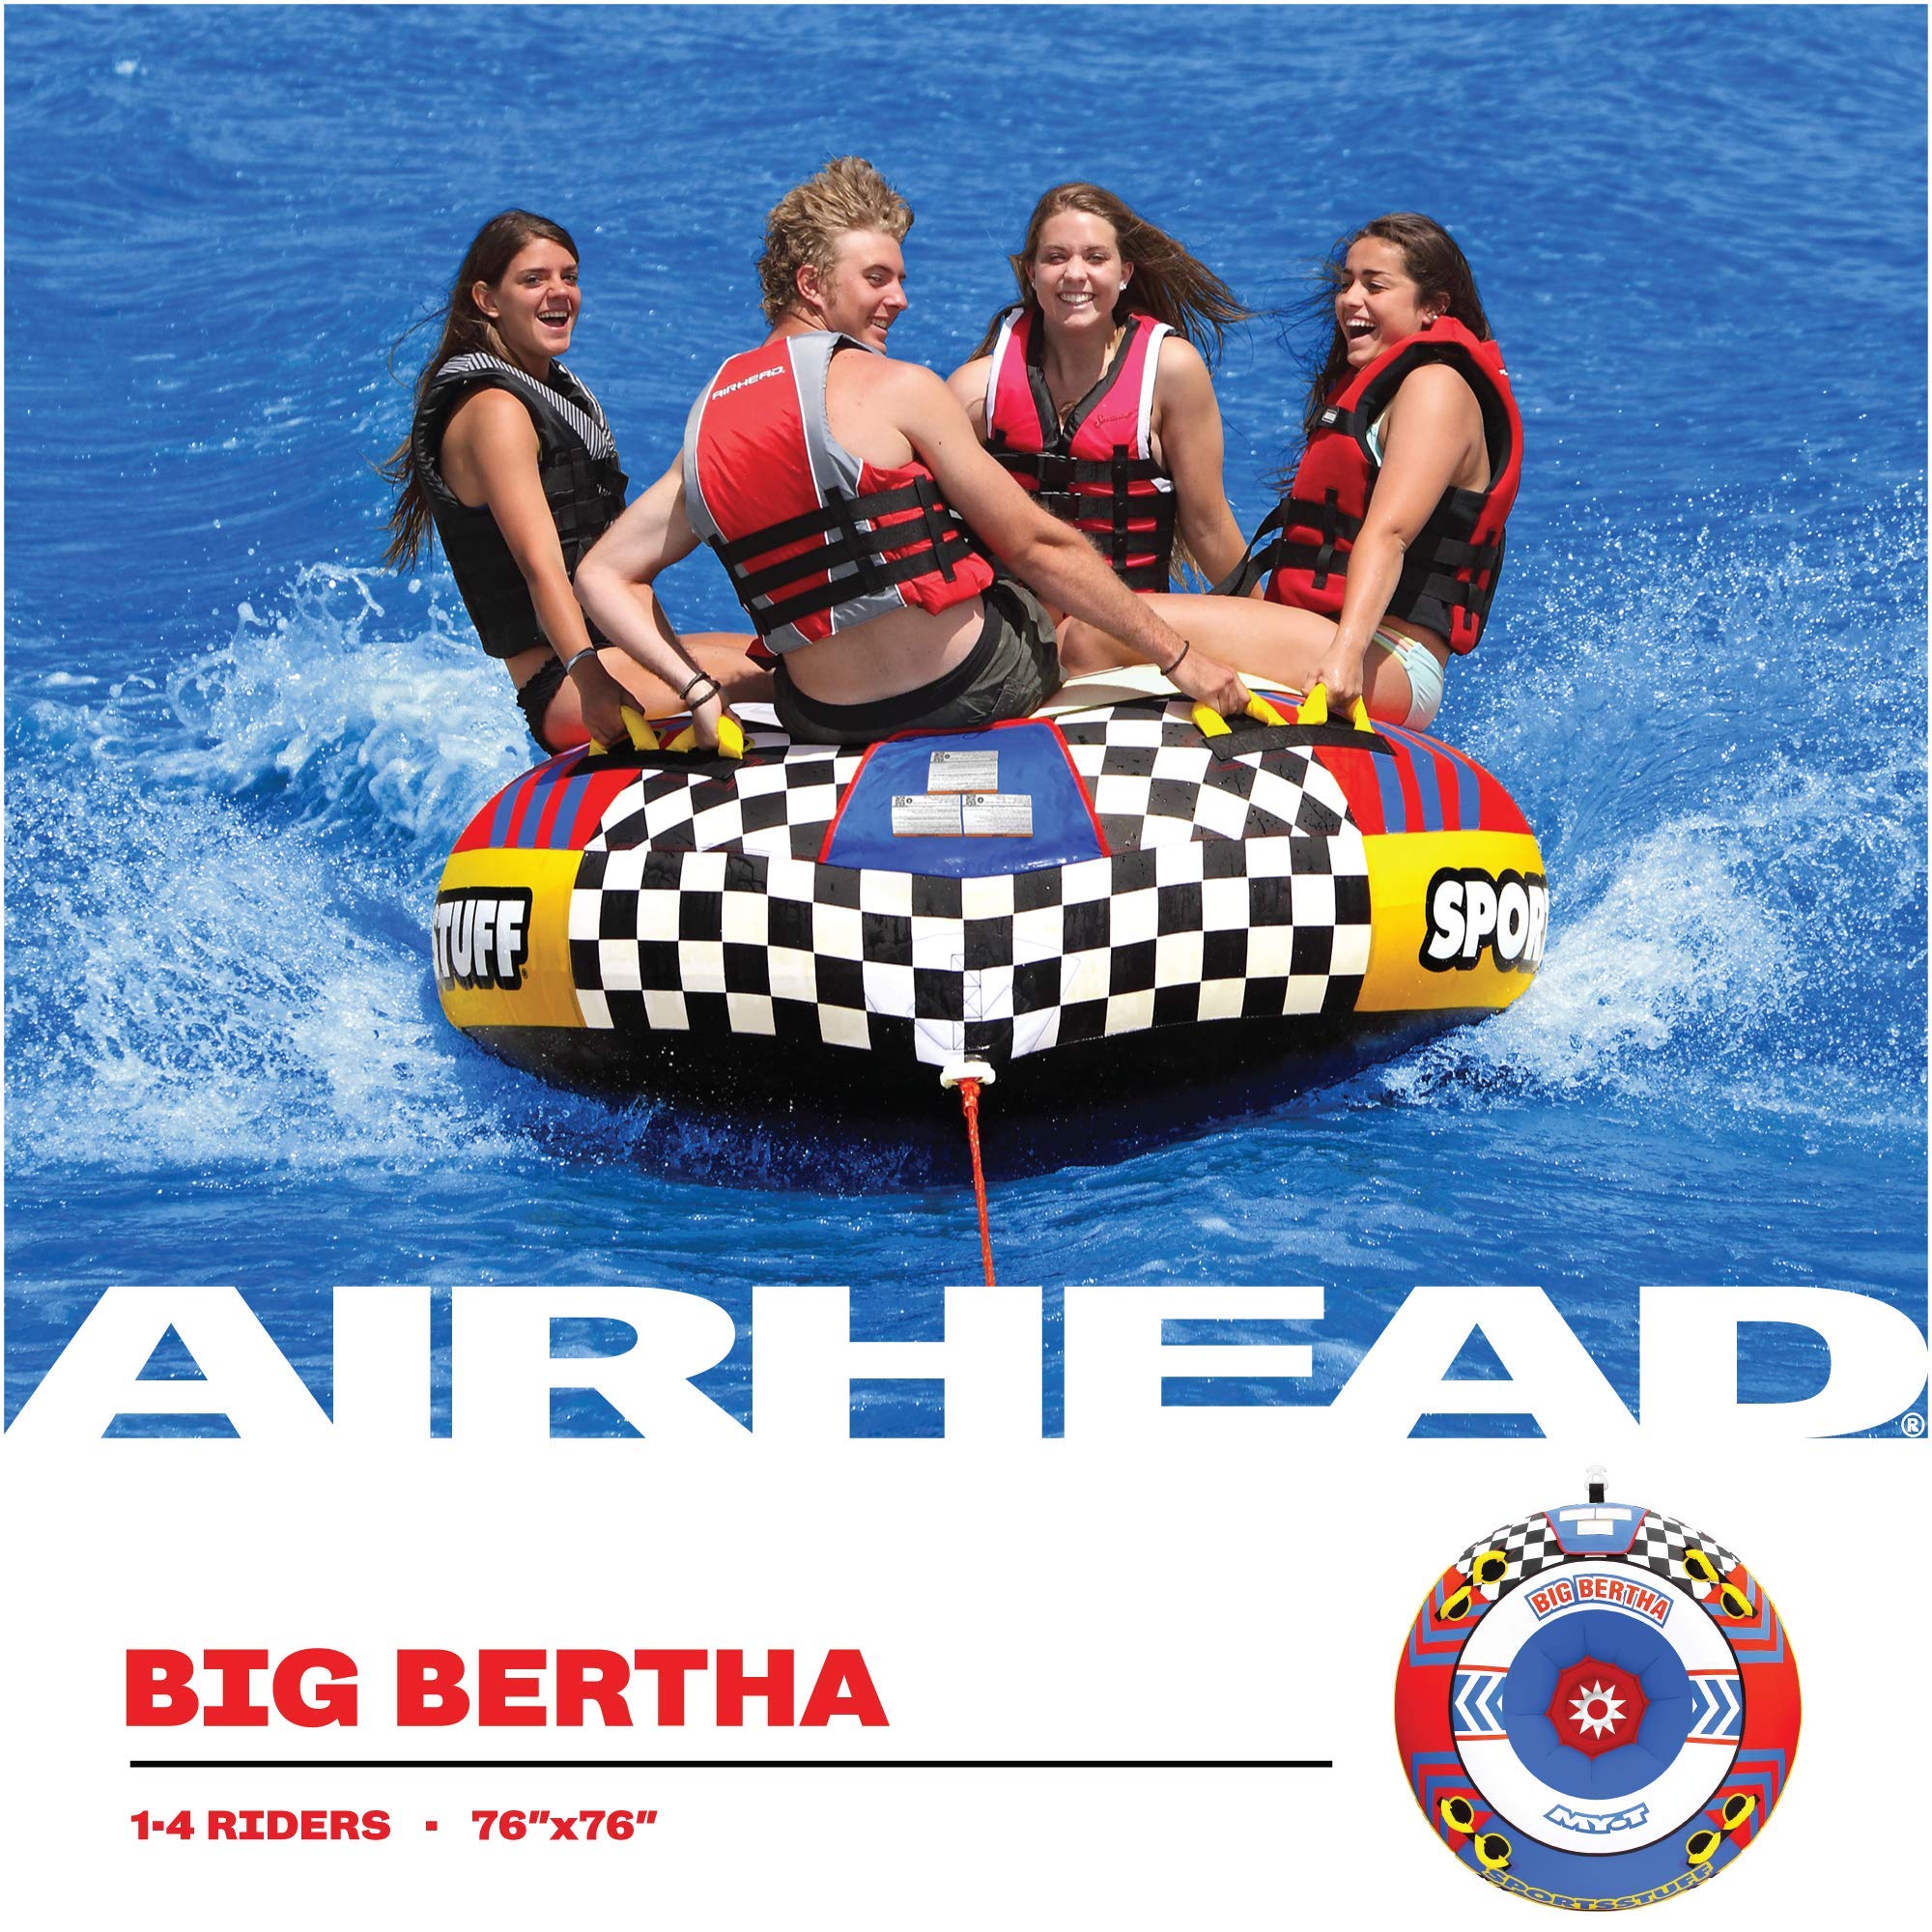 SportsStuff Big Bertha Towable 1-4 Rider Tube for Boating and Water Sports, Kwik-Connect Tow, Double-Stiched Partial Nylon Cover & Patented Speed Safety Valve for Easy Inflating & Deflating